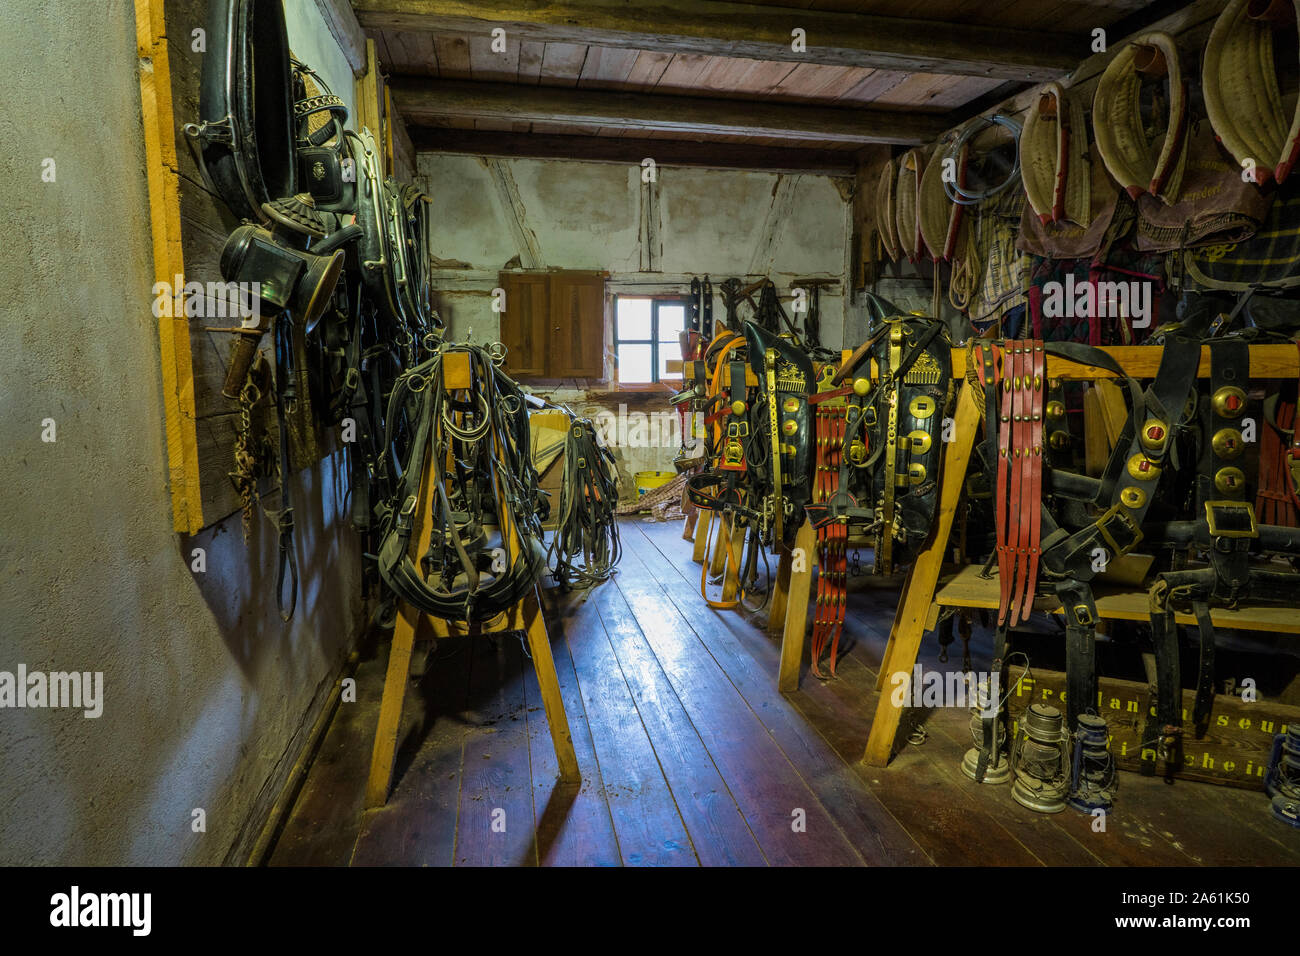 Bad Windsheim, Germany - 16 October 2019: Interior views of a german village house. View of colorful horse harness from a german farmer Stock Photo